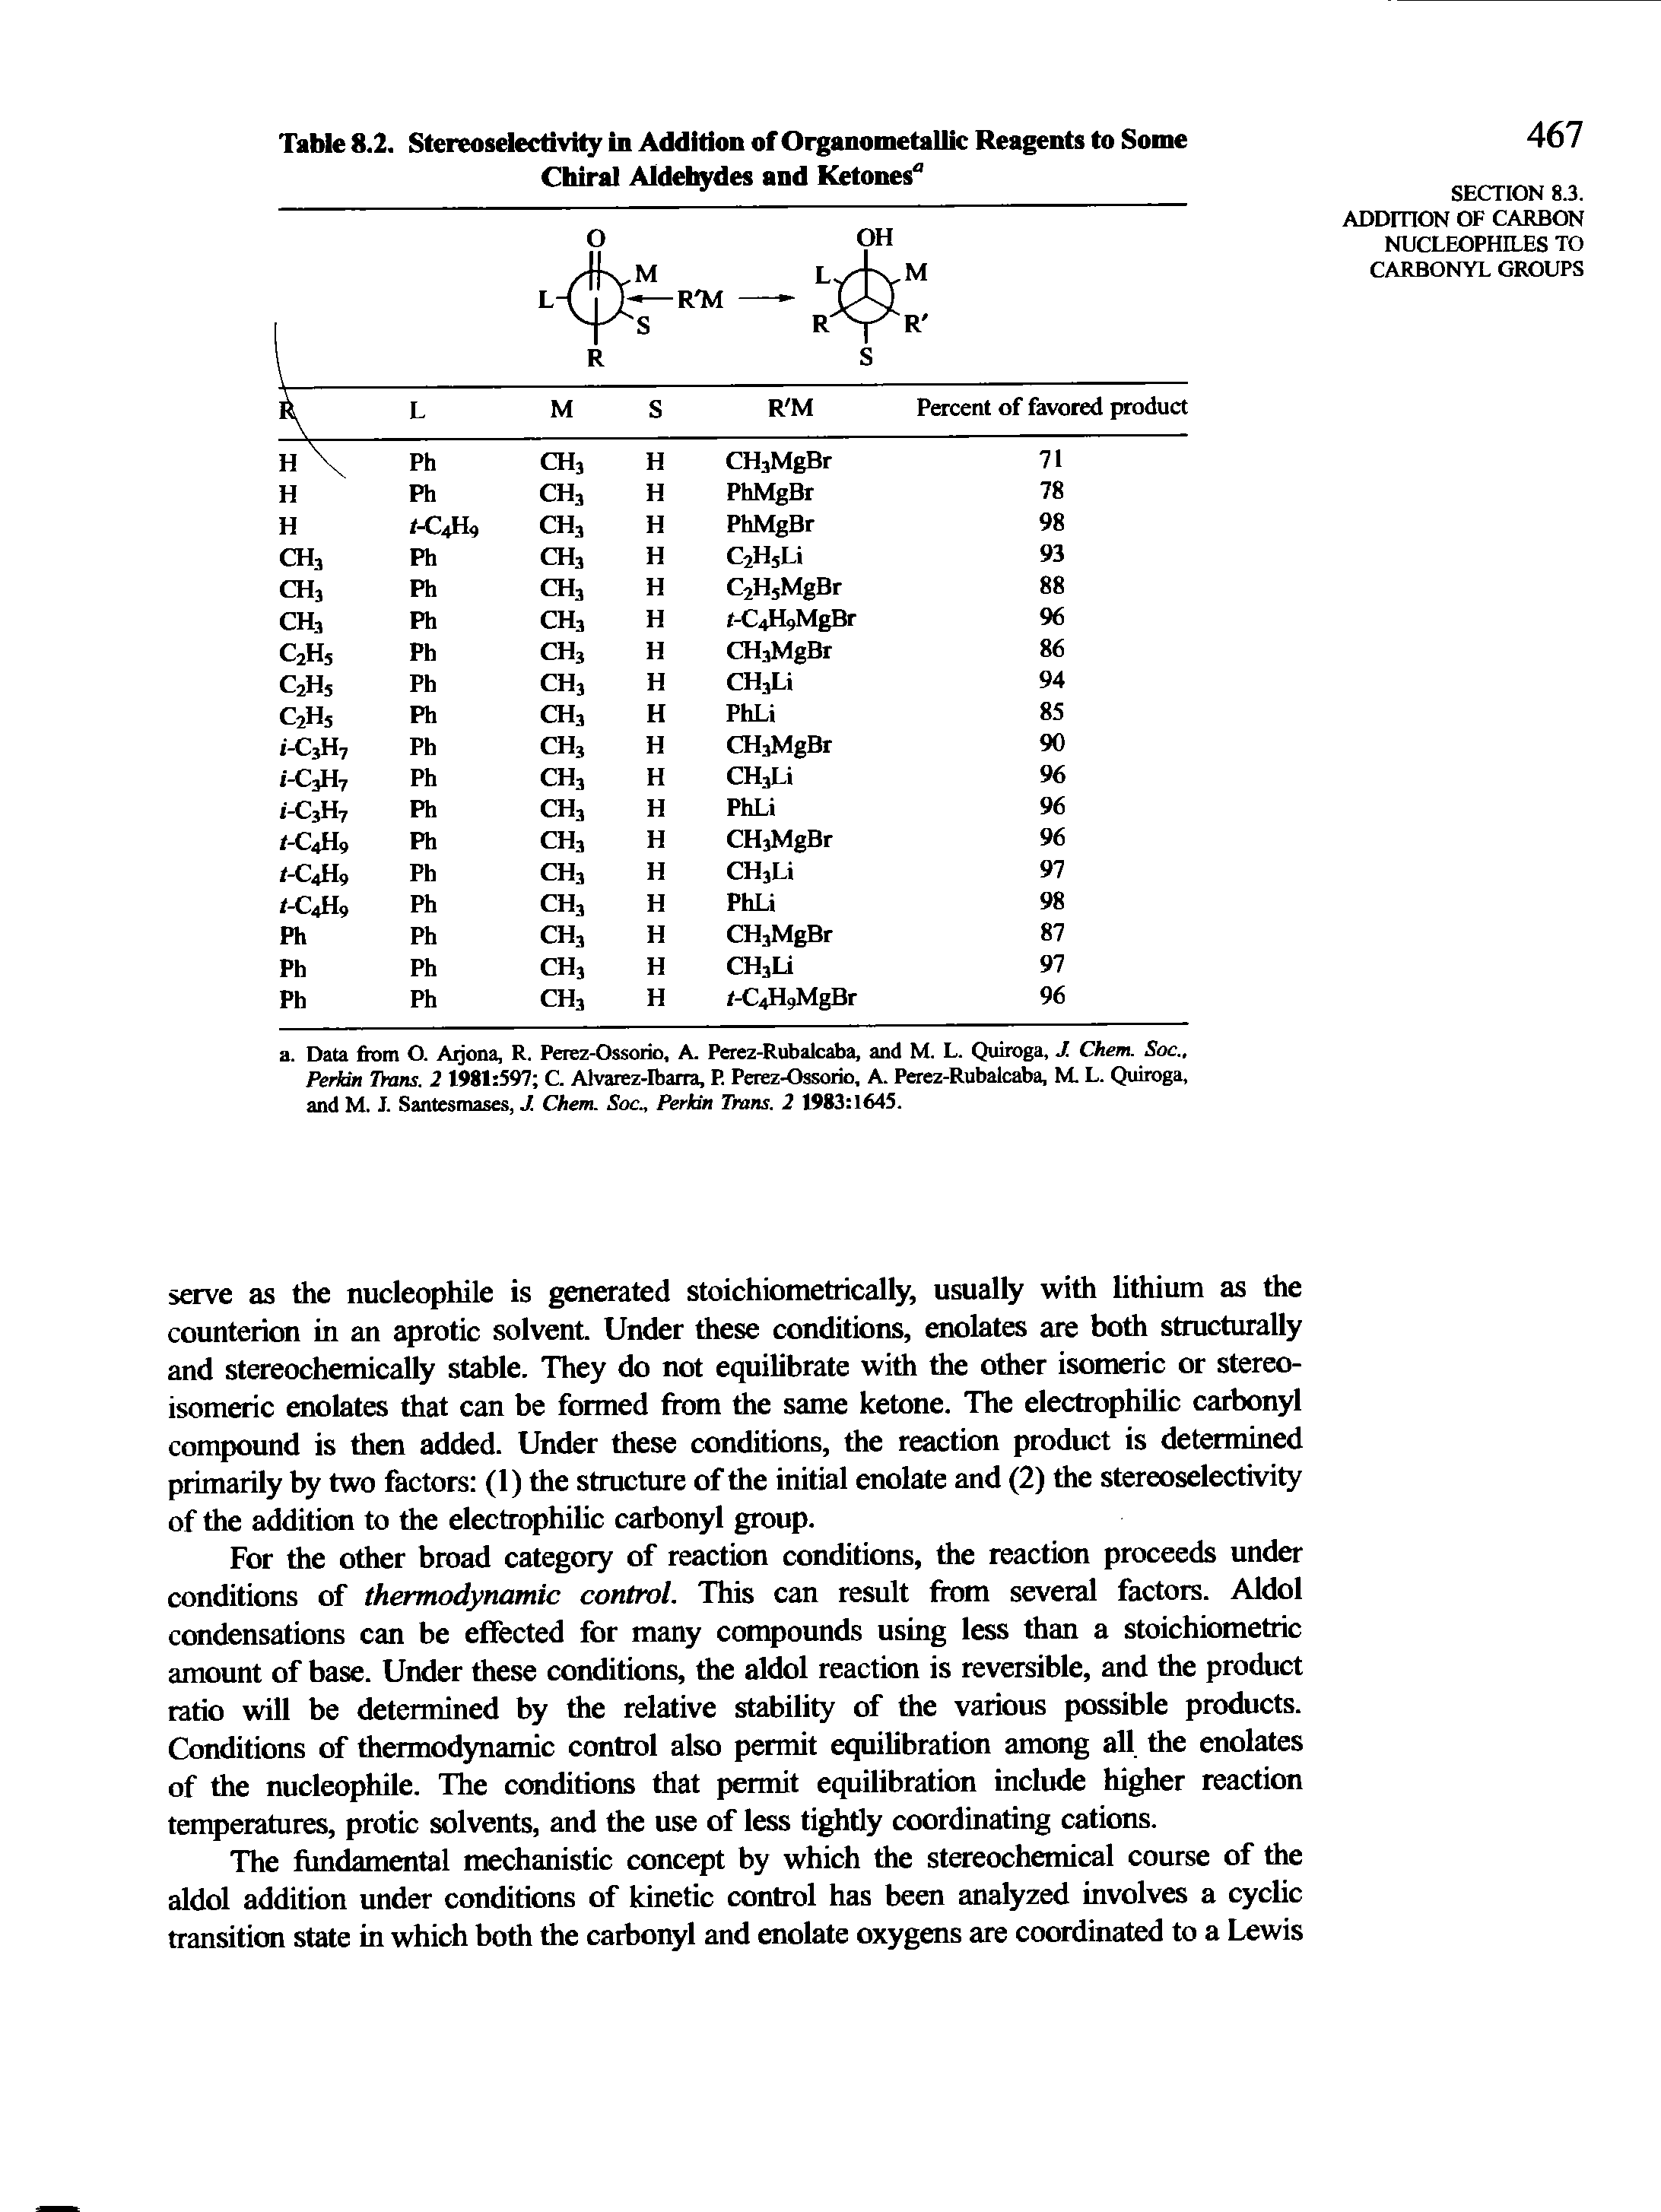 Table 8.2. Stereoselectivity in Addition of Organometallic Reagents to Some Chiral Aldelqrdes and Ketones"...